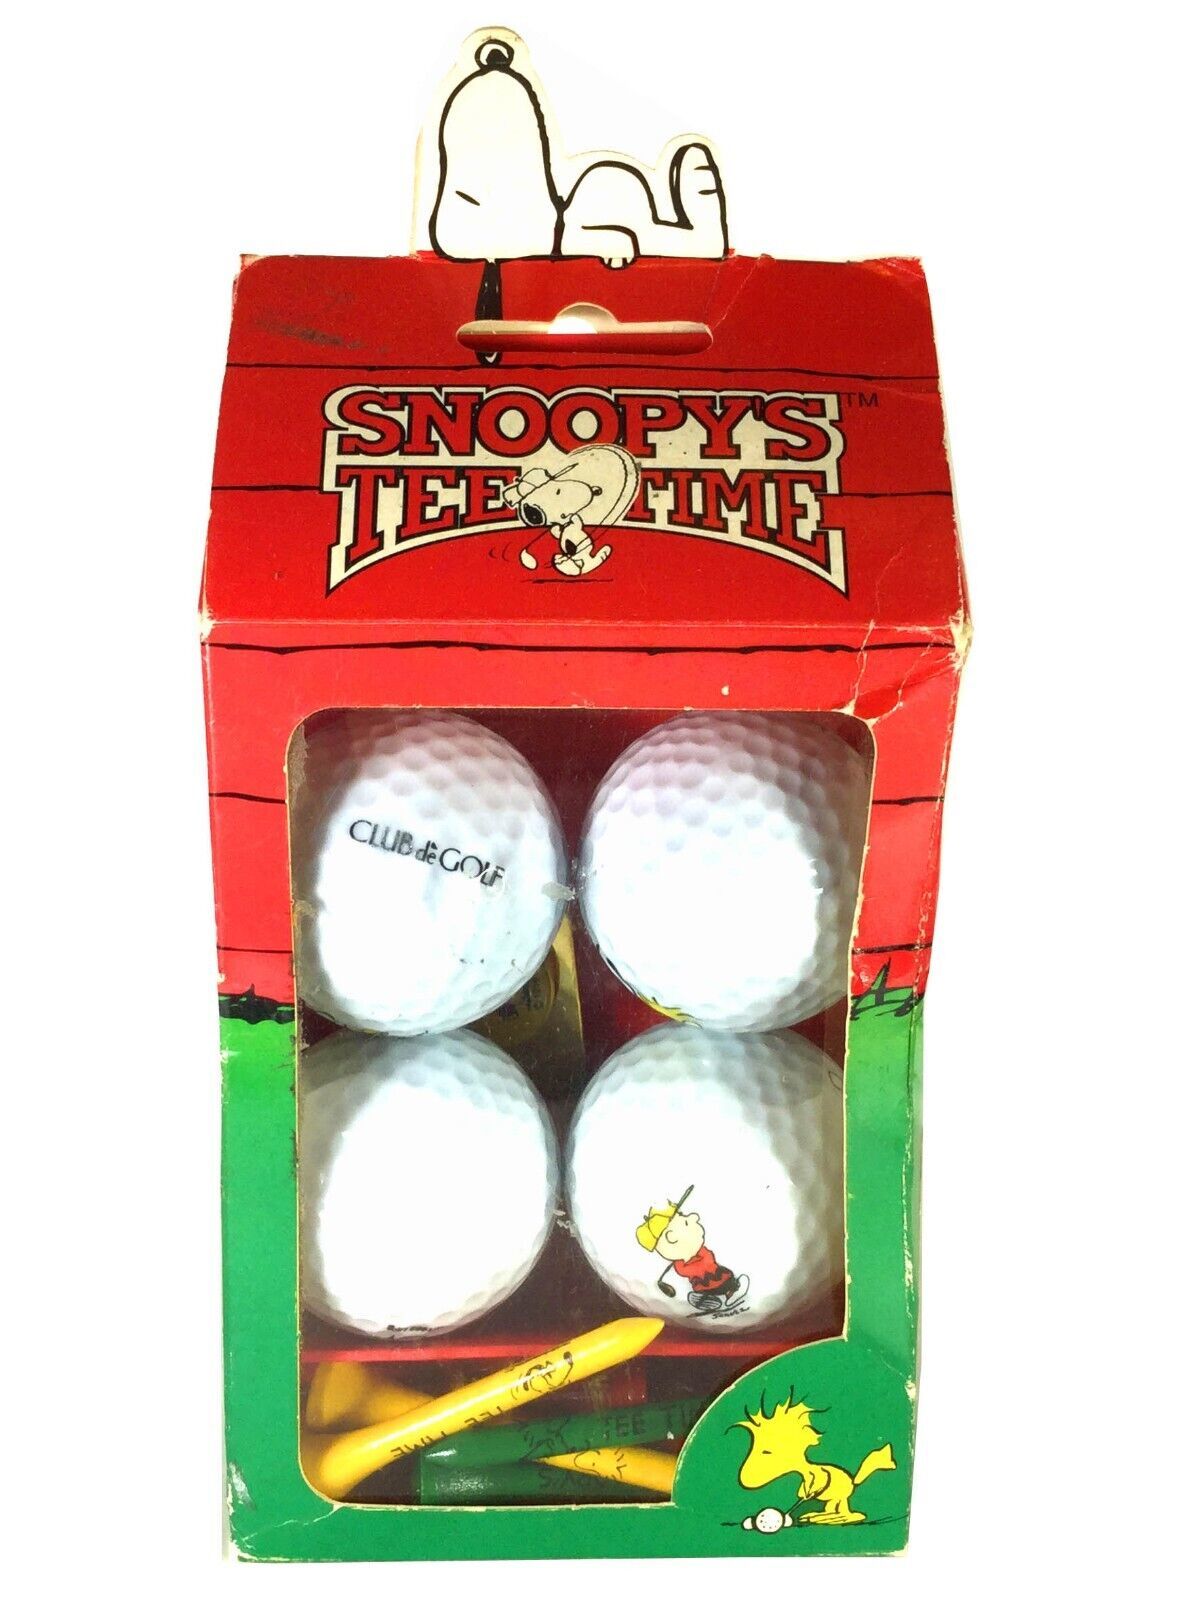 Peanuts - Snoopy's Tee Time Golf Ball Decorative Box Gift Set of 4 w/ Tees  - $27.99